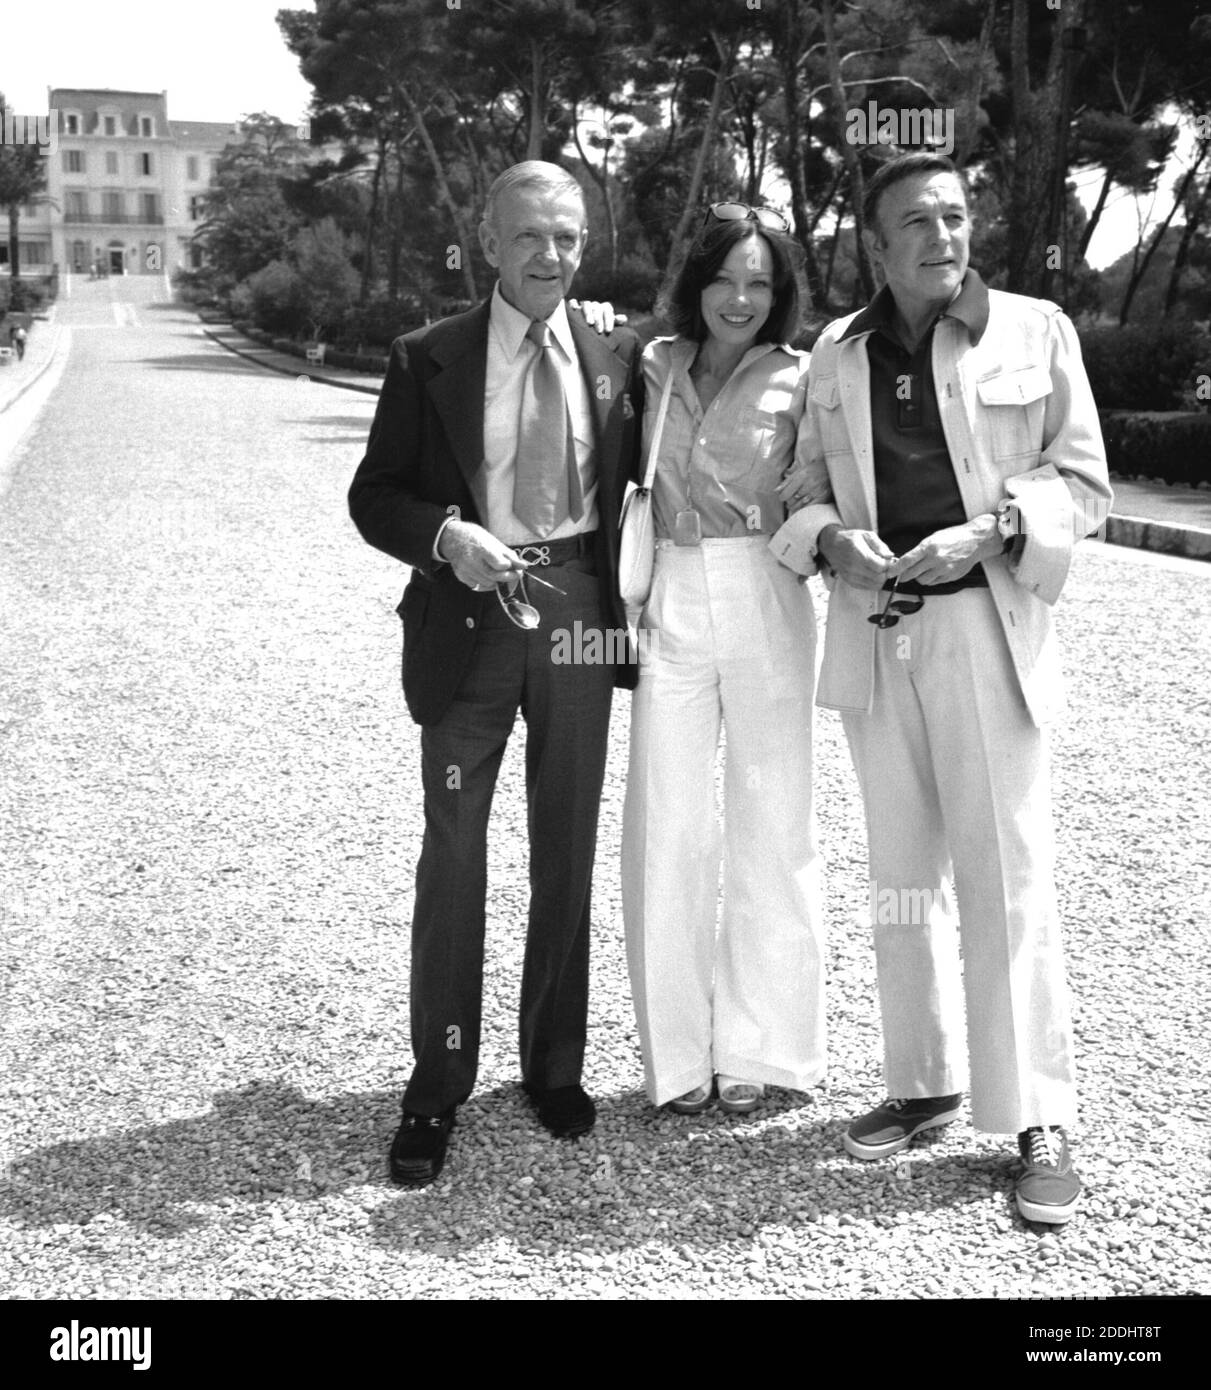 Fred Astaire, Leslie Caron and Gene Kelly at the 28th Cannes Film Festival (France), May 1975. --- Fred Astaire, Leslie Caron e Gene Kelly al 28° Festival del Cinema di Cannes (Francia), maggio 1975. Stock Photo